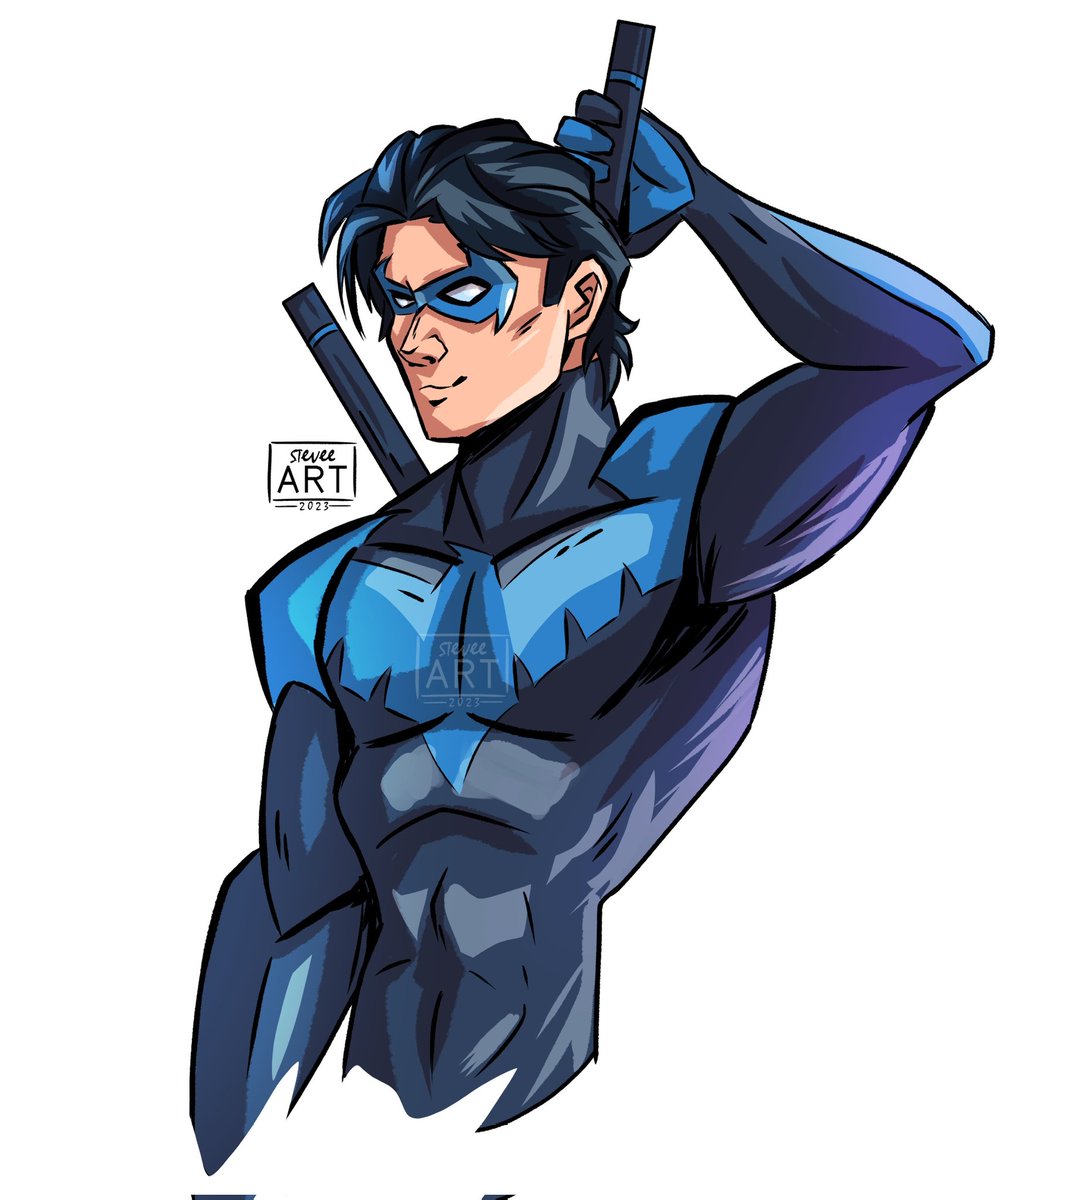 If you see this, post a Nightwing